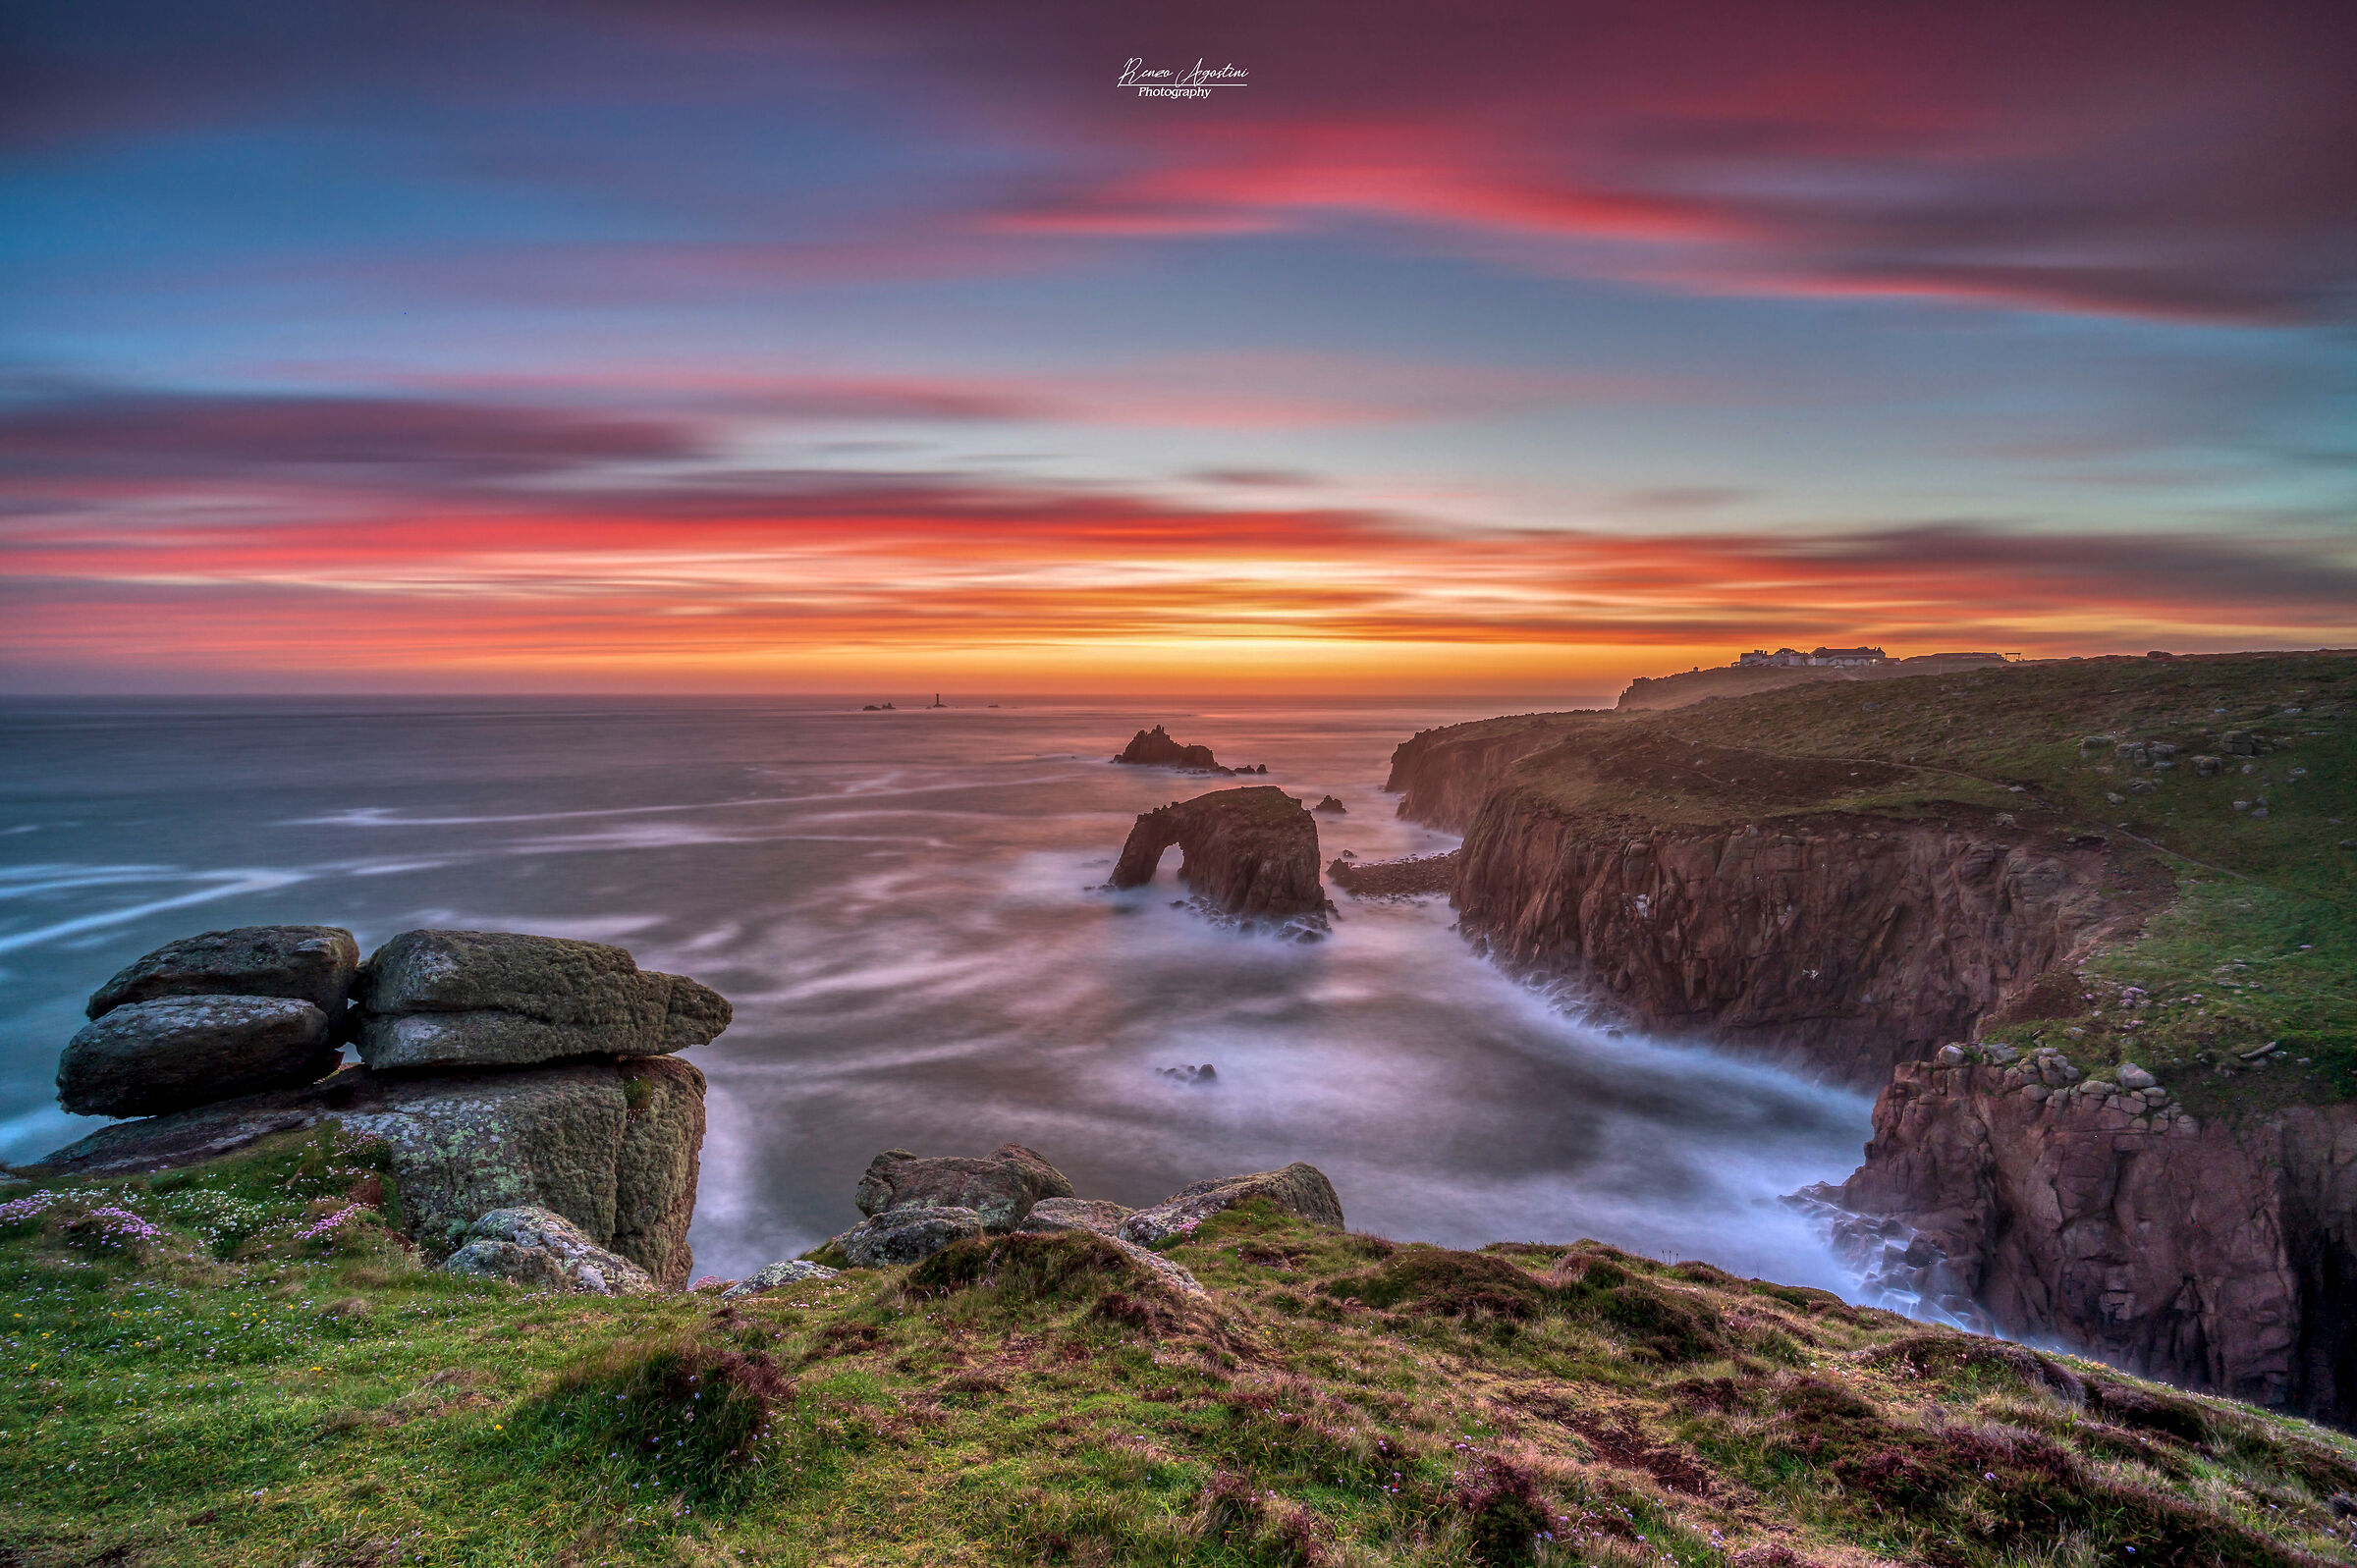 Sunset at Lands'End-Cornwall....